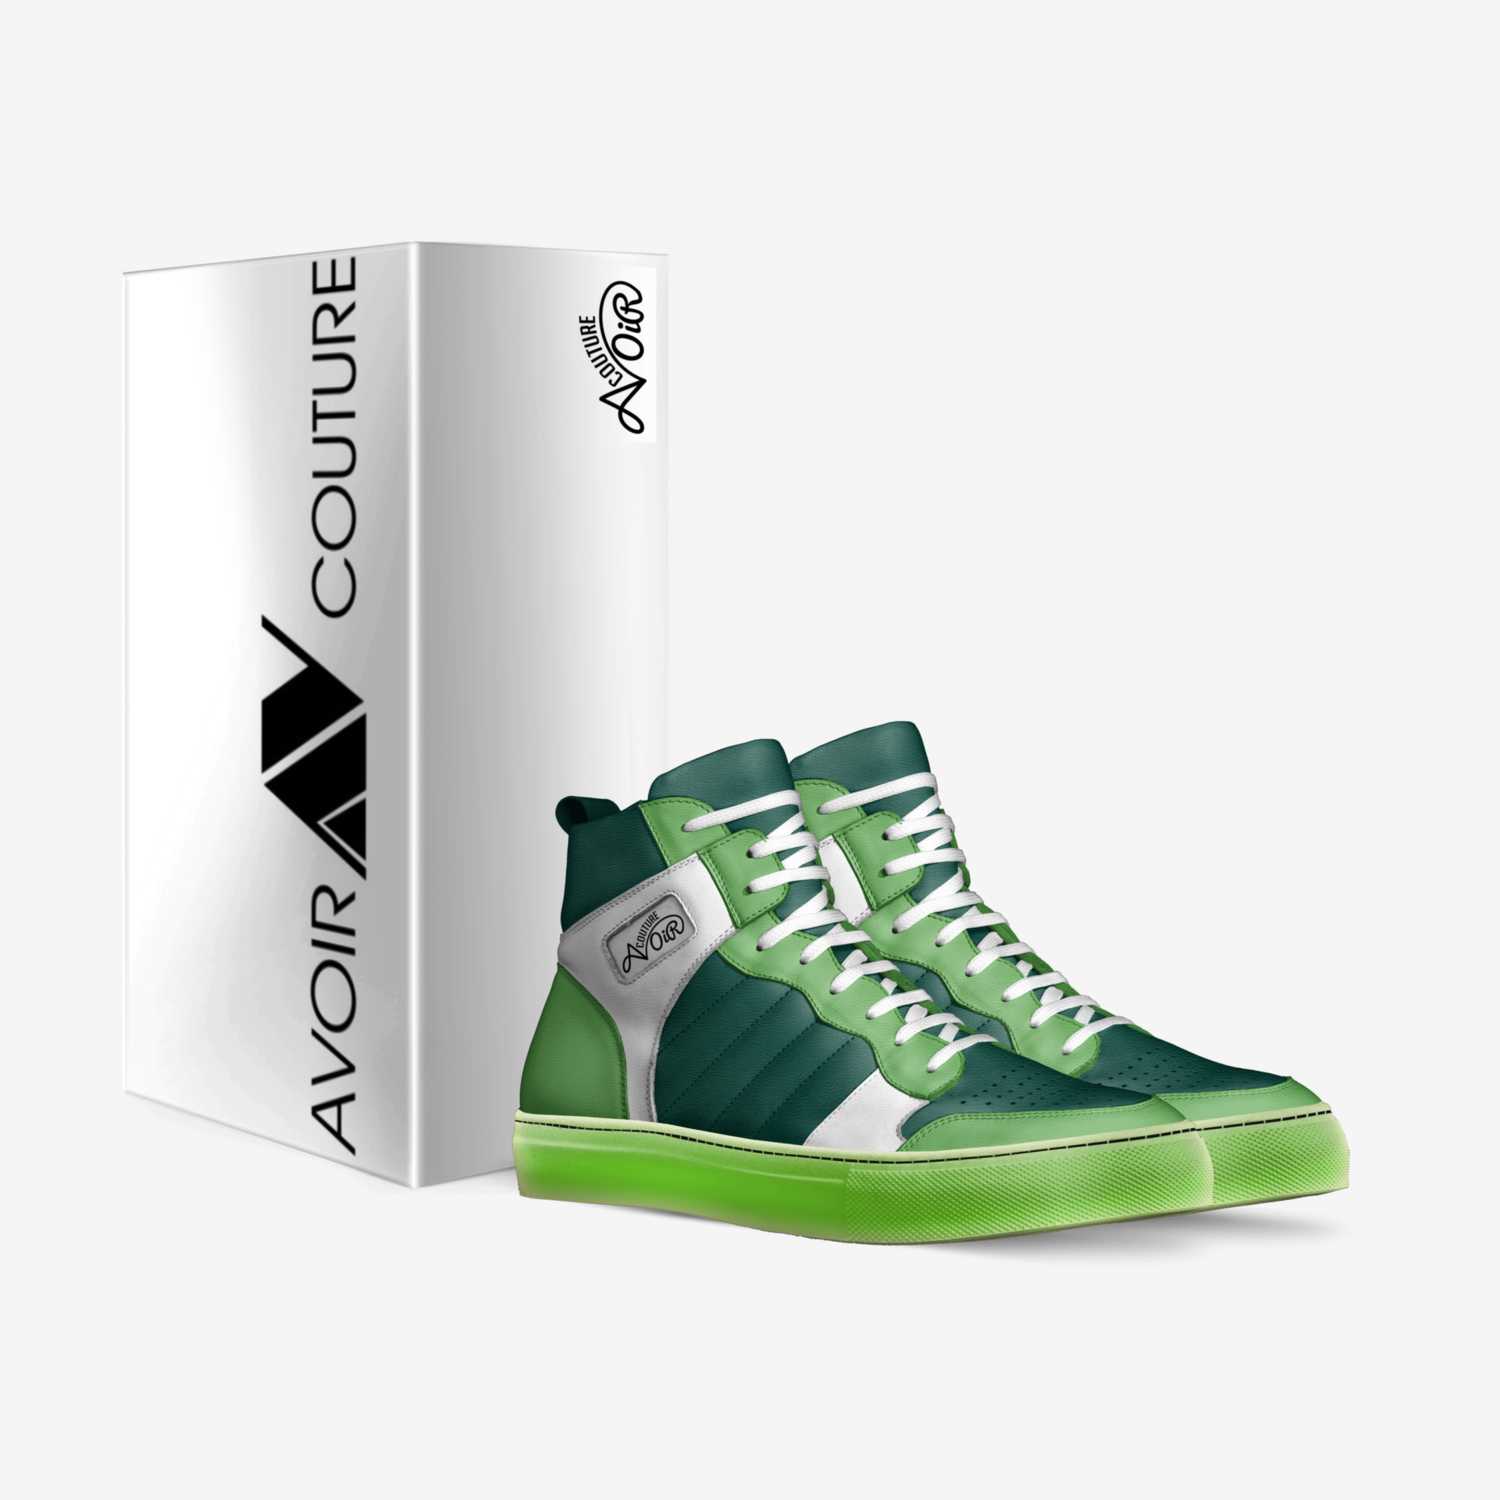 Avoir custom made in Italy shoes by Lamont Crooks | Box view